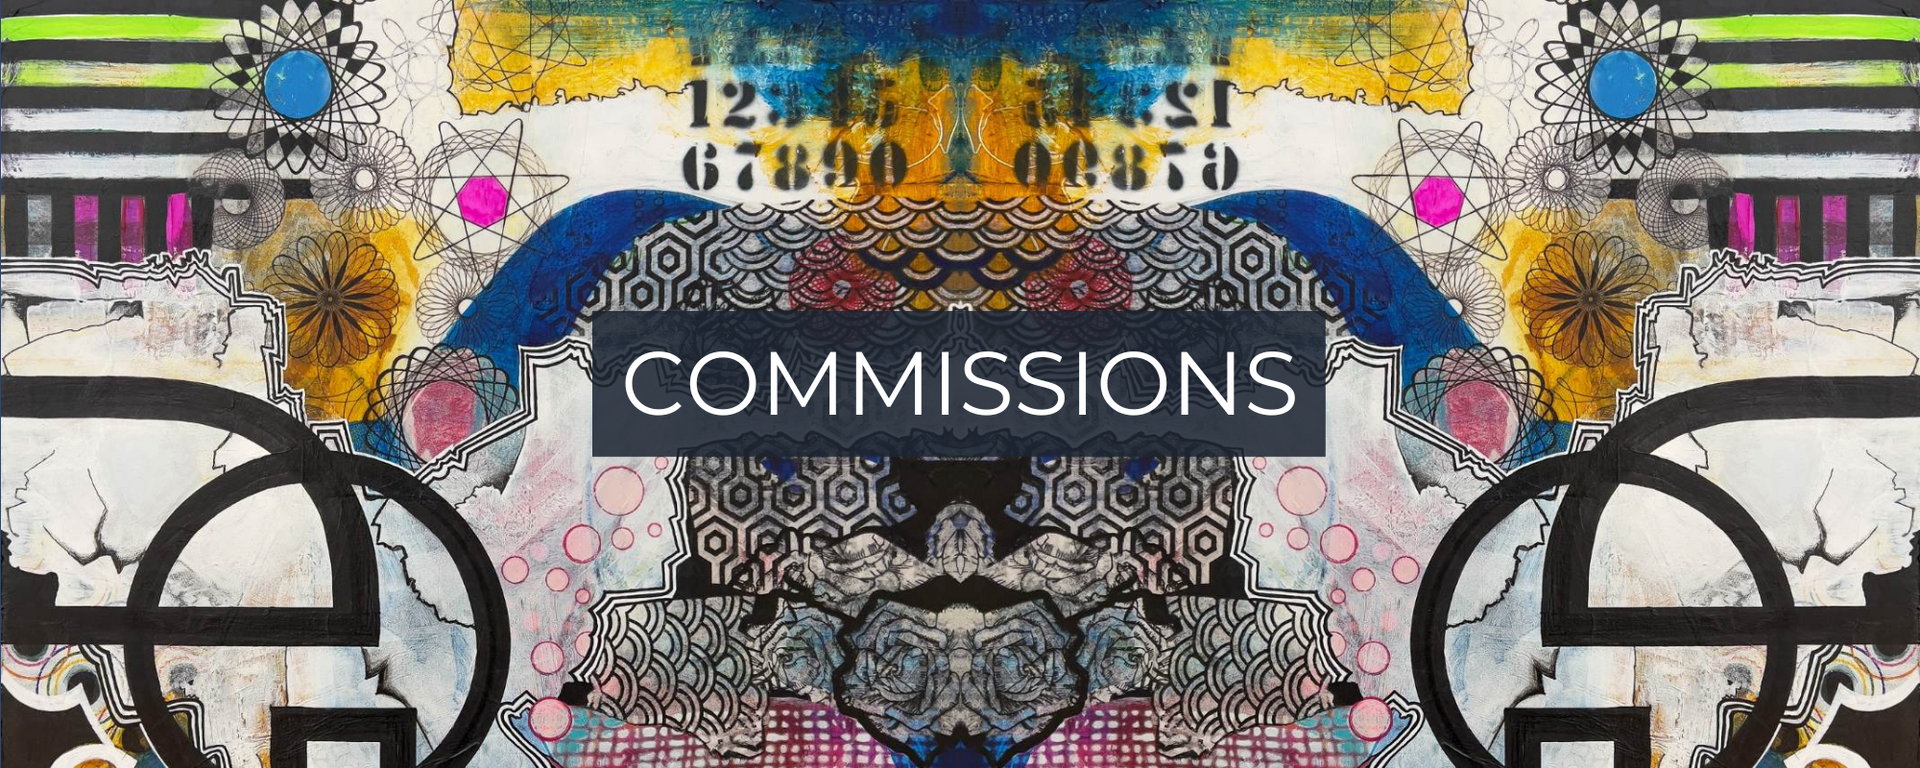 commissions banner featuring original abstract art by local Calgary artist Mary-Jo Lough